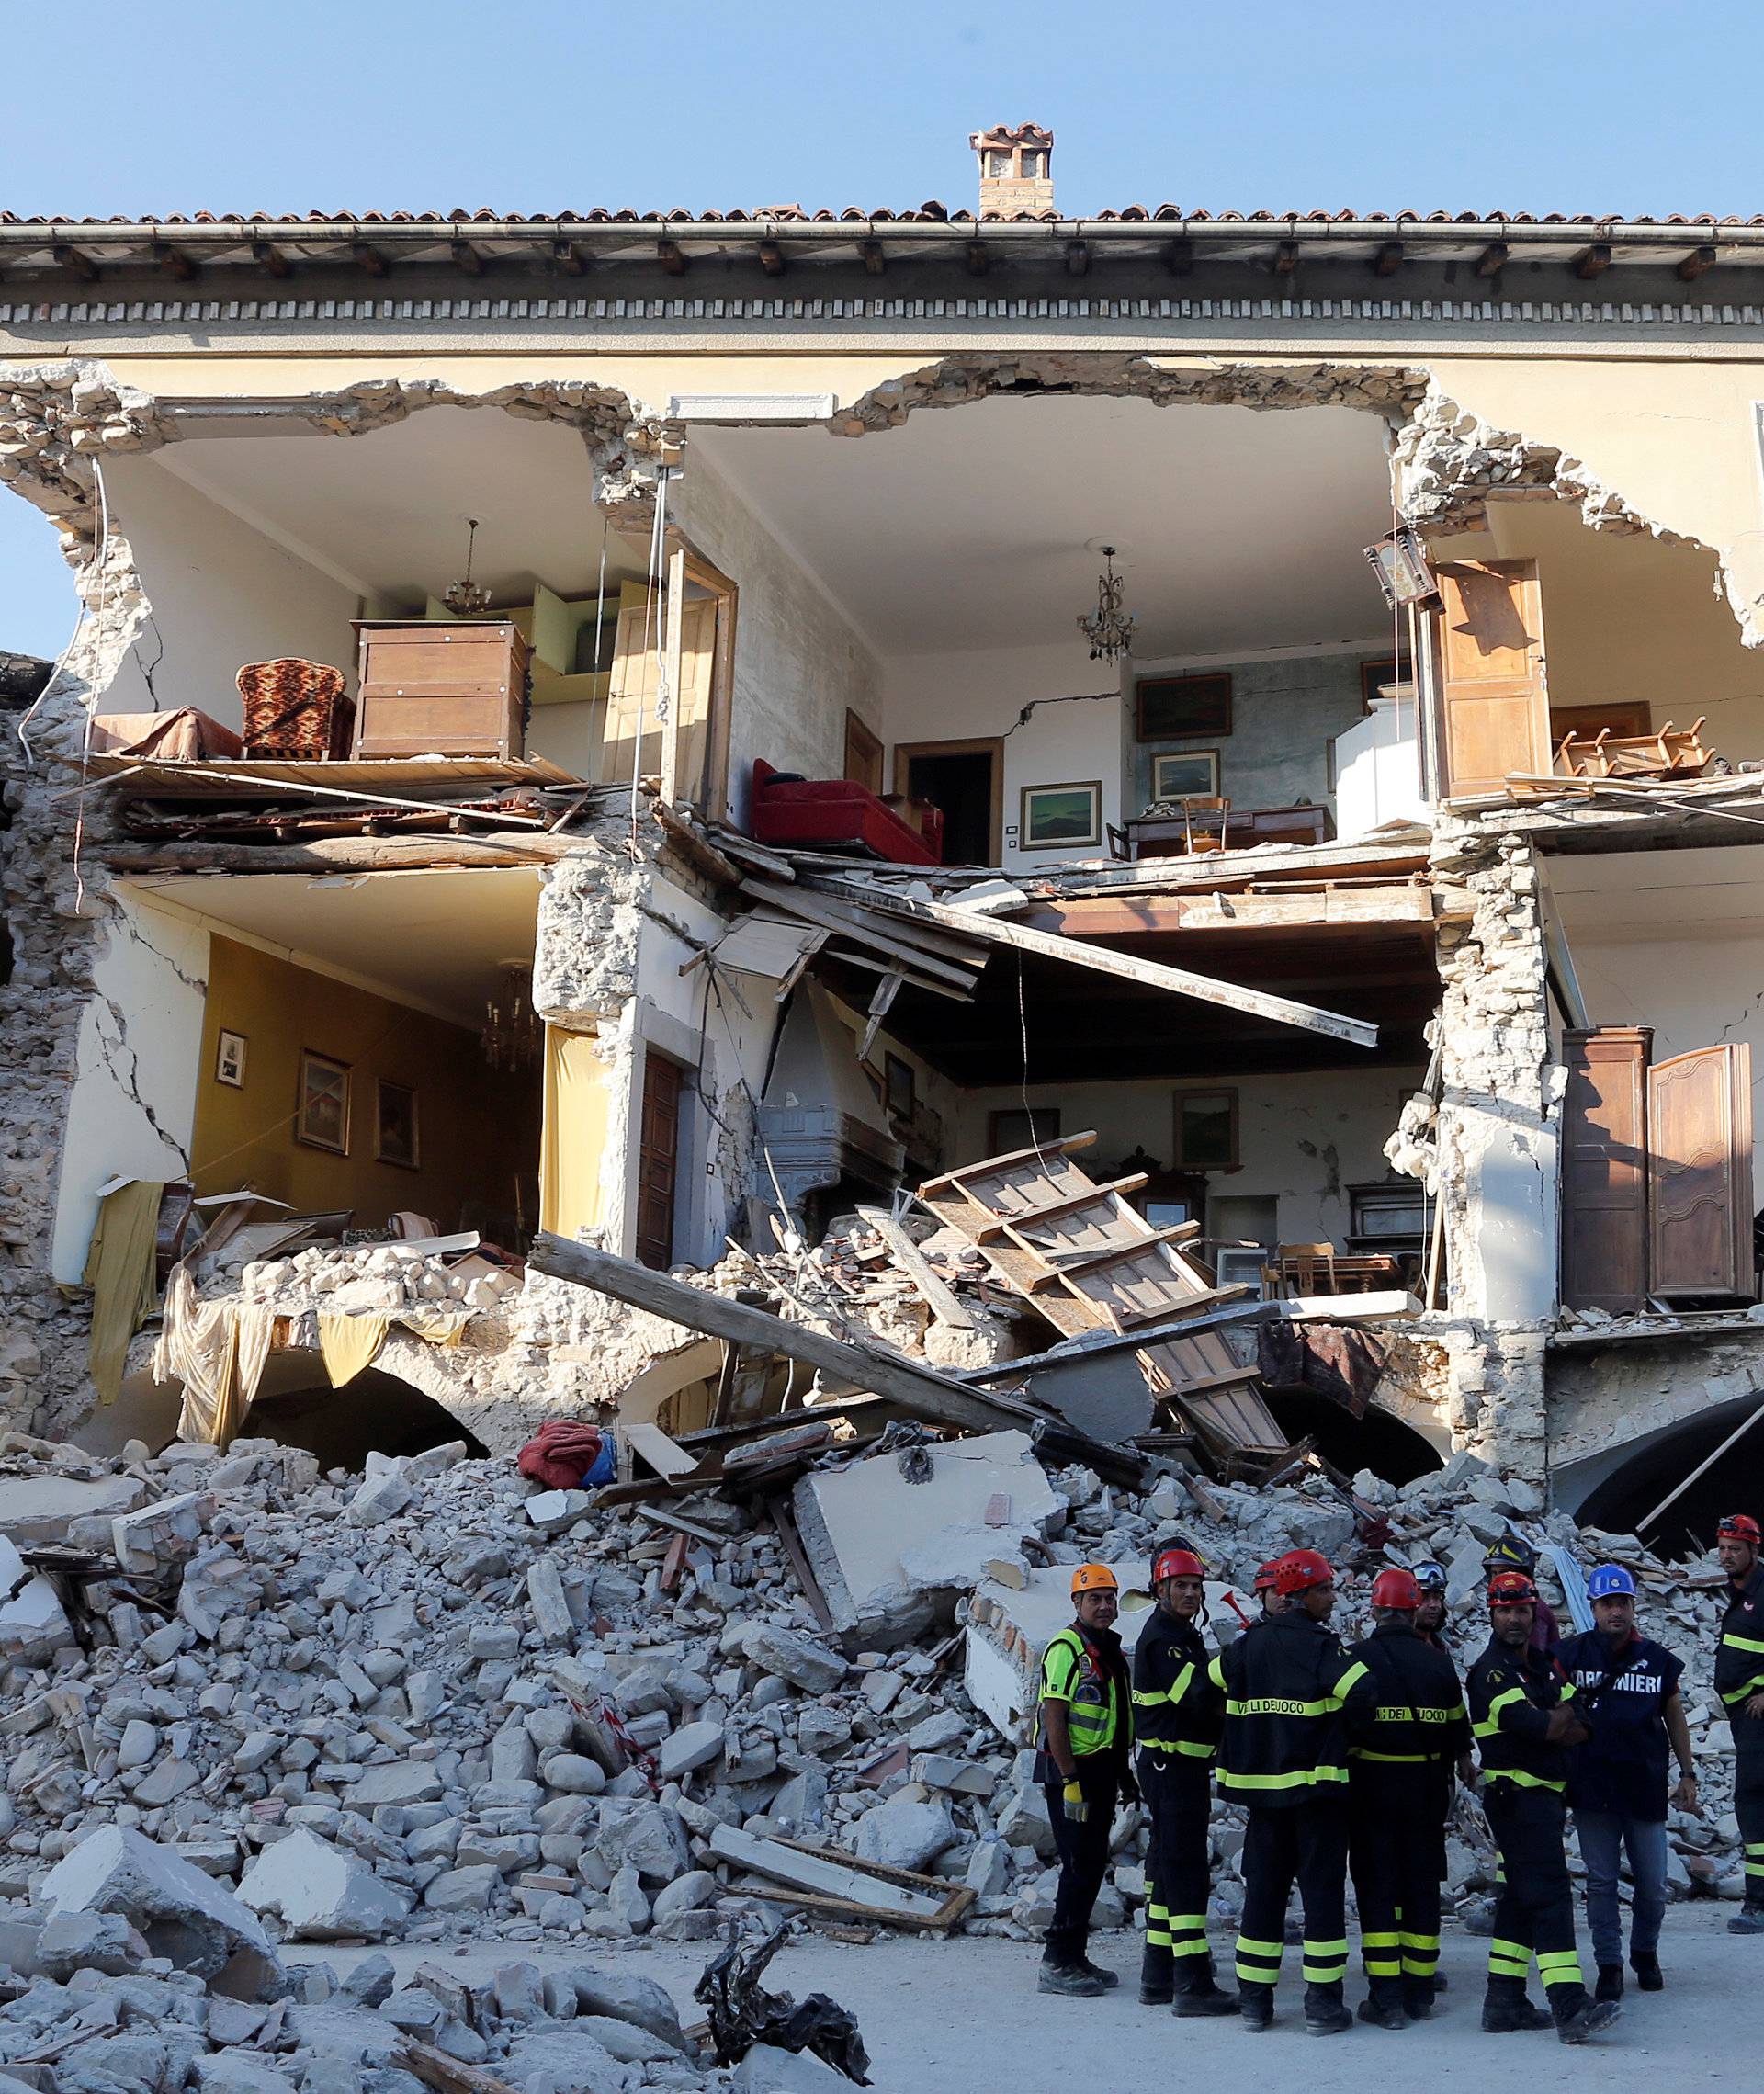 Firefighters stand next a collapsed house following an earthquake in Amatrice